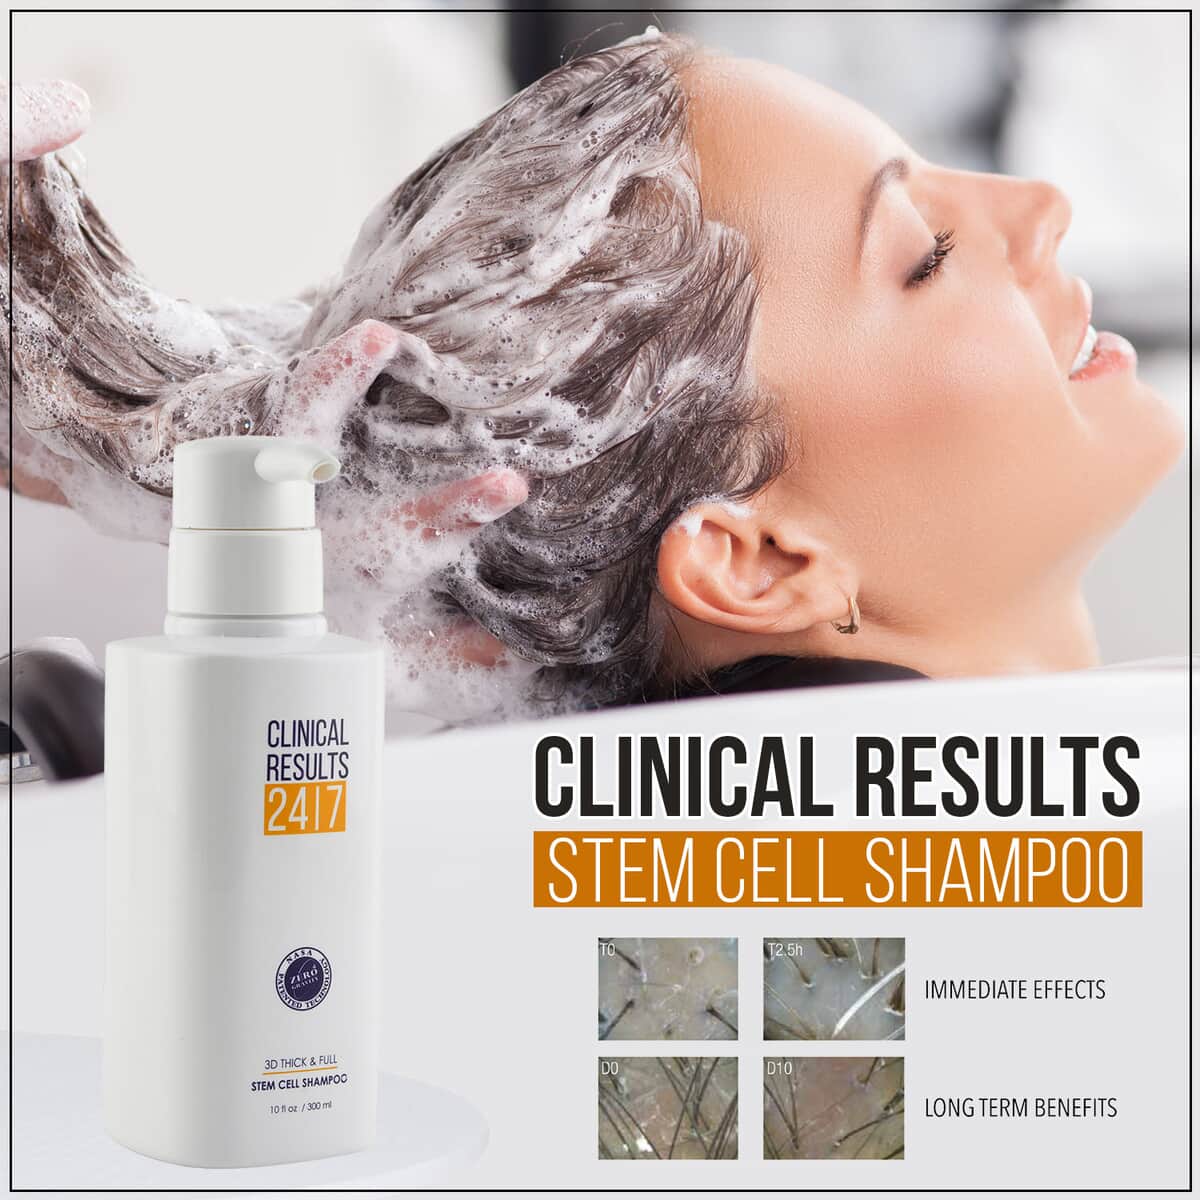 Clinical Results NASA 3D Thick & Full Stem Cell Shampoo 3-Dimensional Stem Cell Technology, Sulfates and Parabens Free Hair Cleaner 10oz image number 1